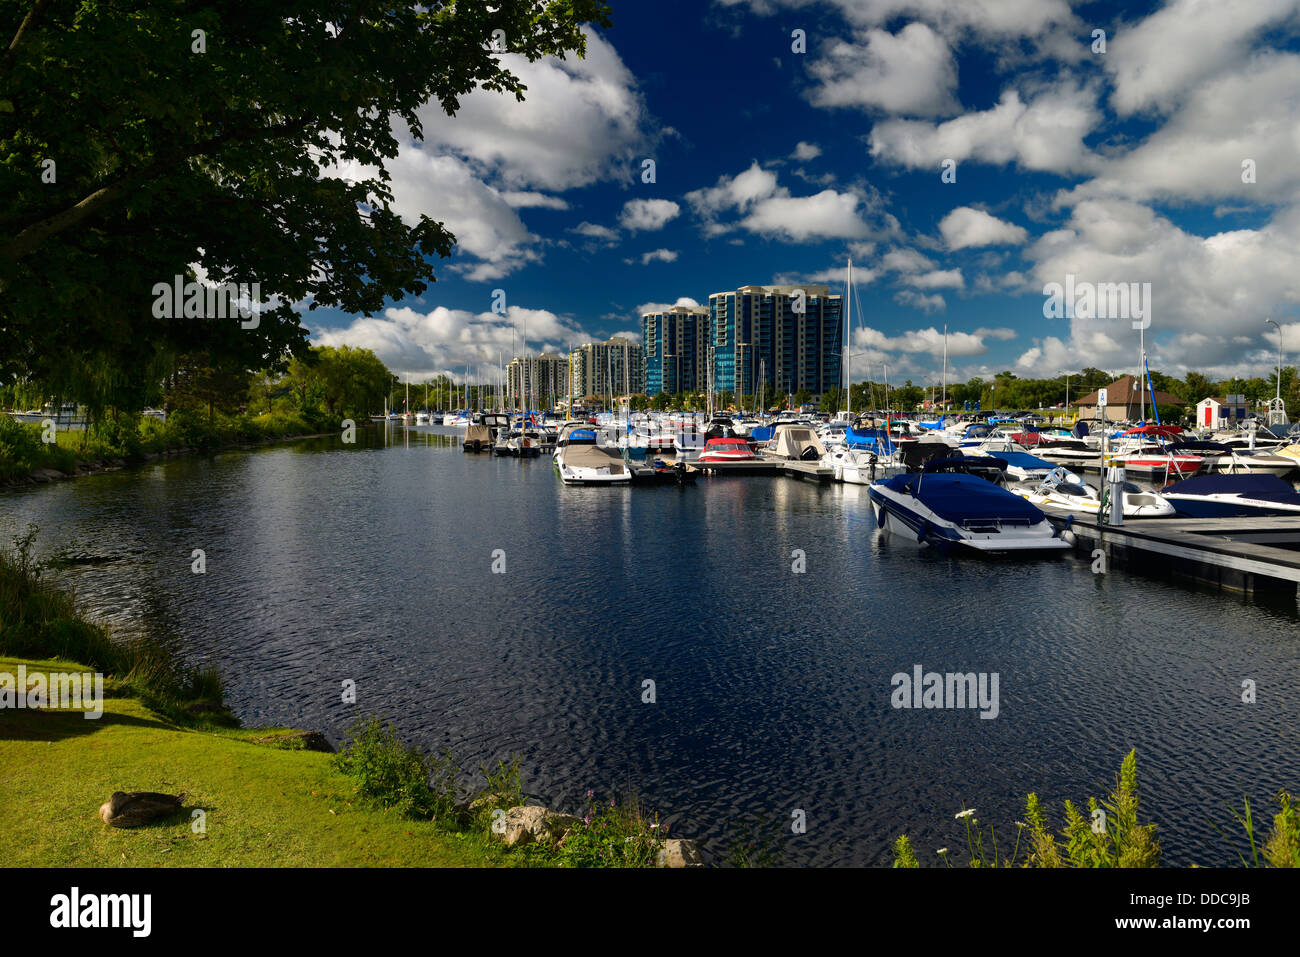 Morning at Barrie Ontario Marina on Kempenfelt Bay with boats and condos Stock Photo